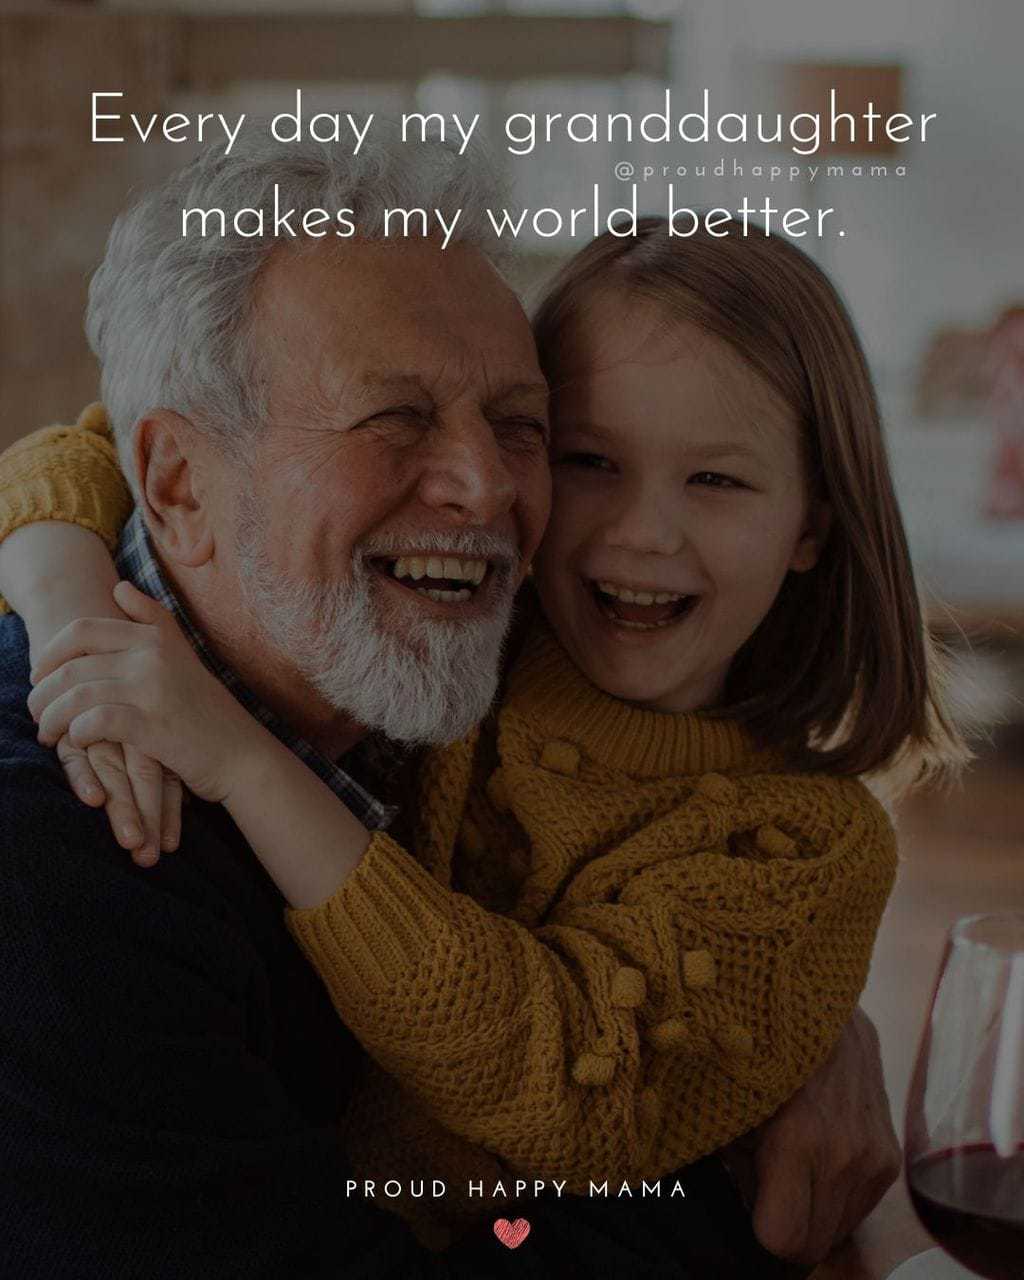 Granddaughter Quotes - Every day my granddaughter makes my world better.’